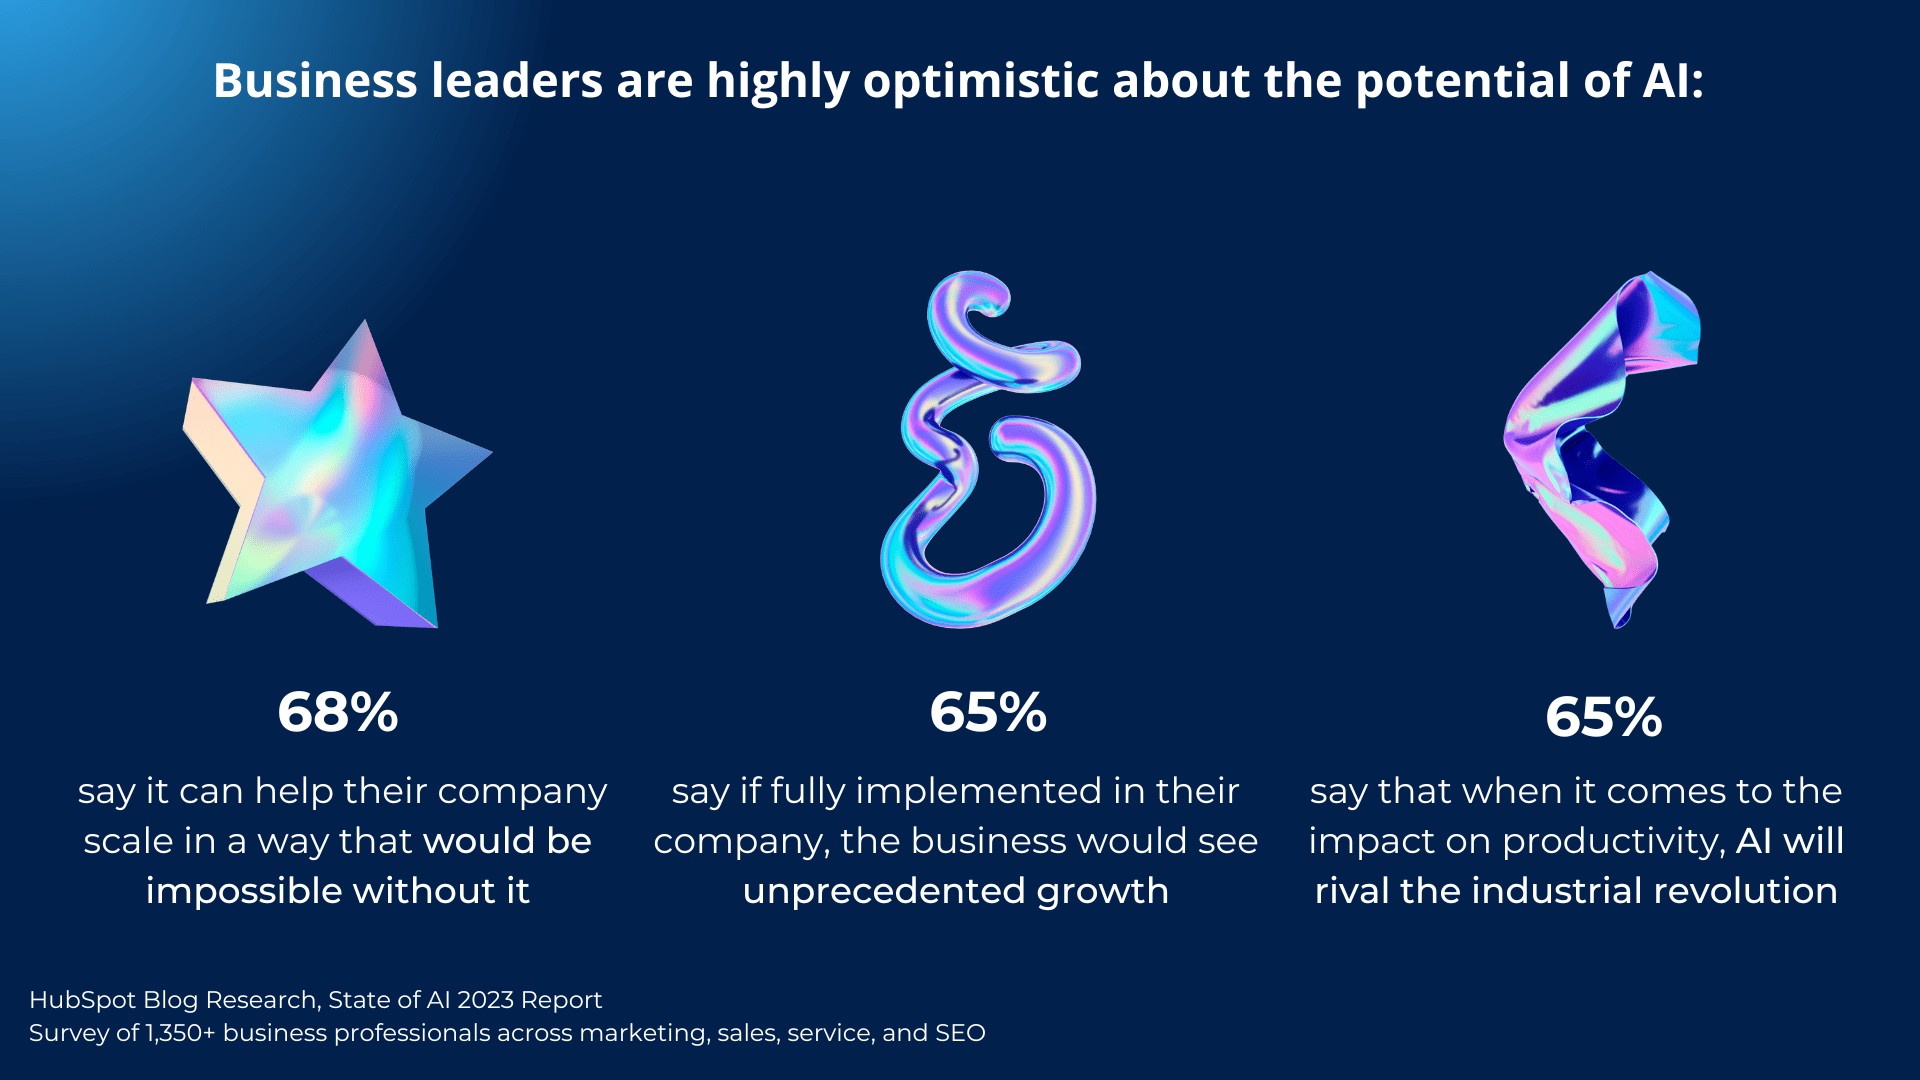 business leaders are optimistic about AI